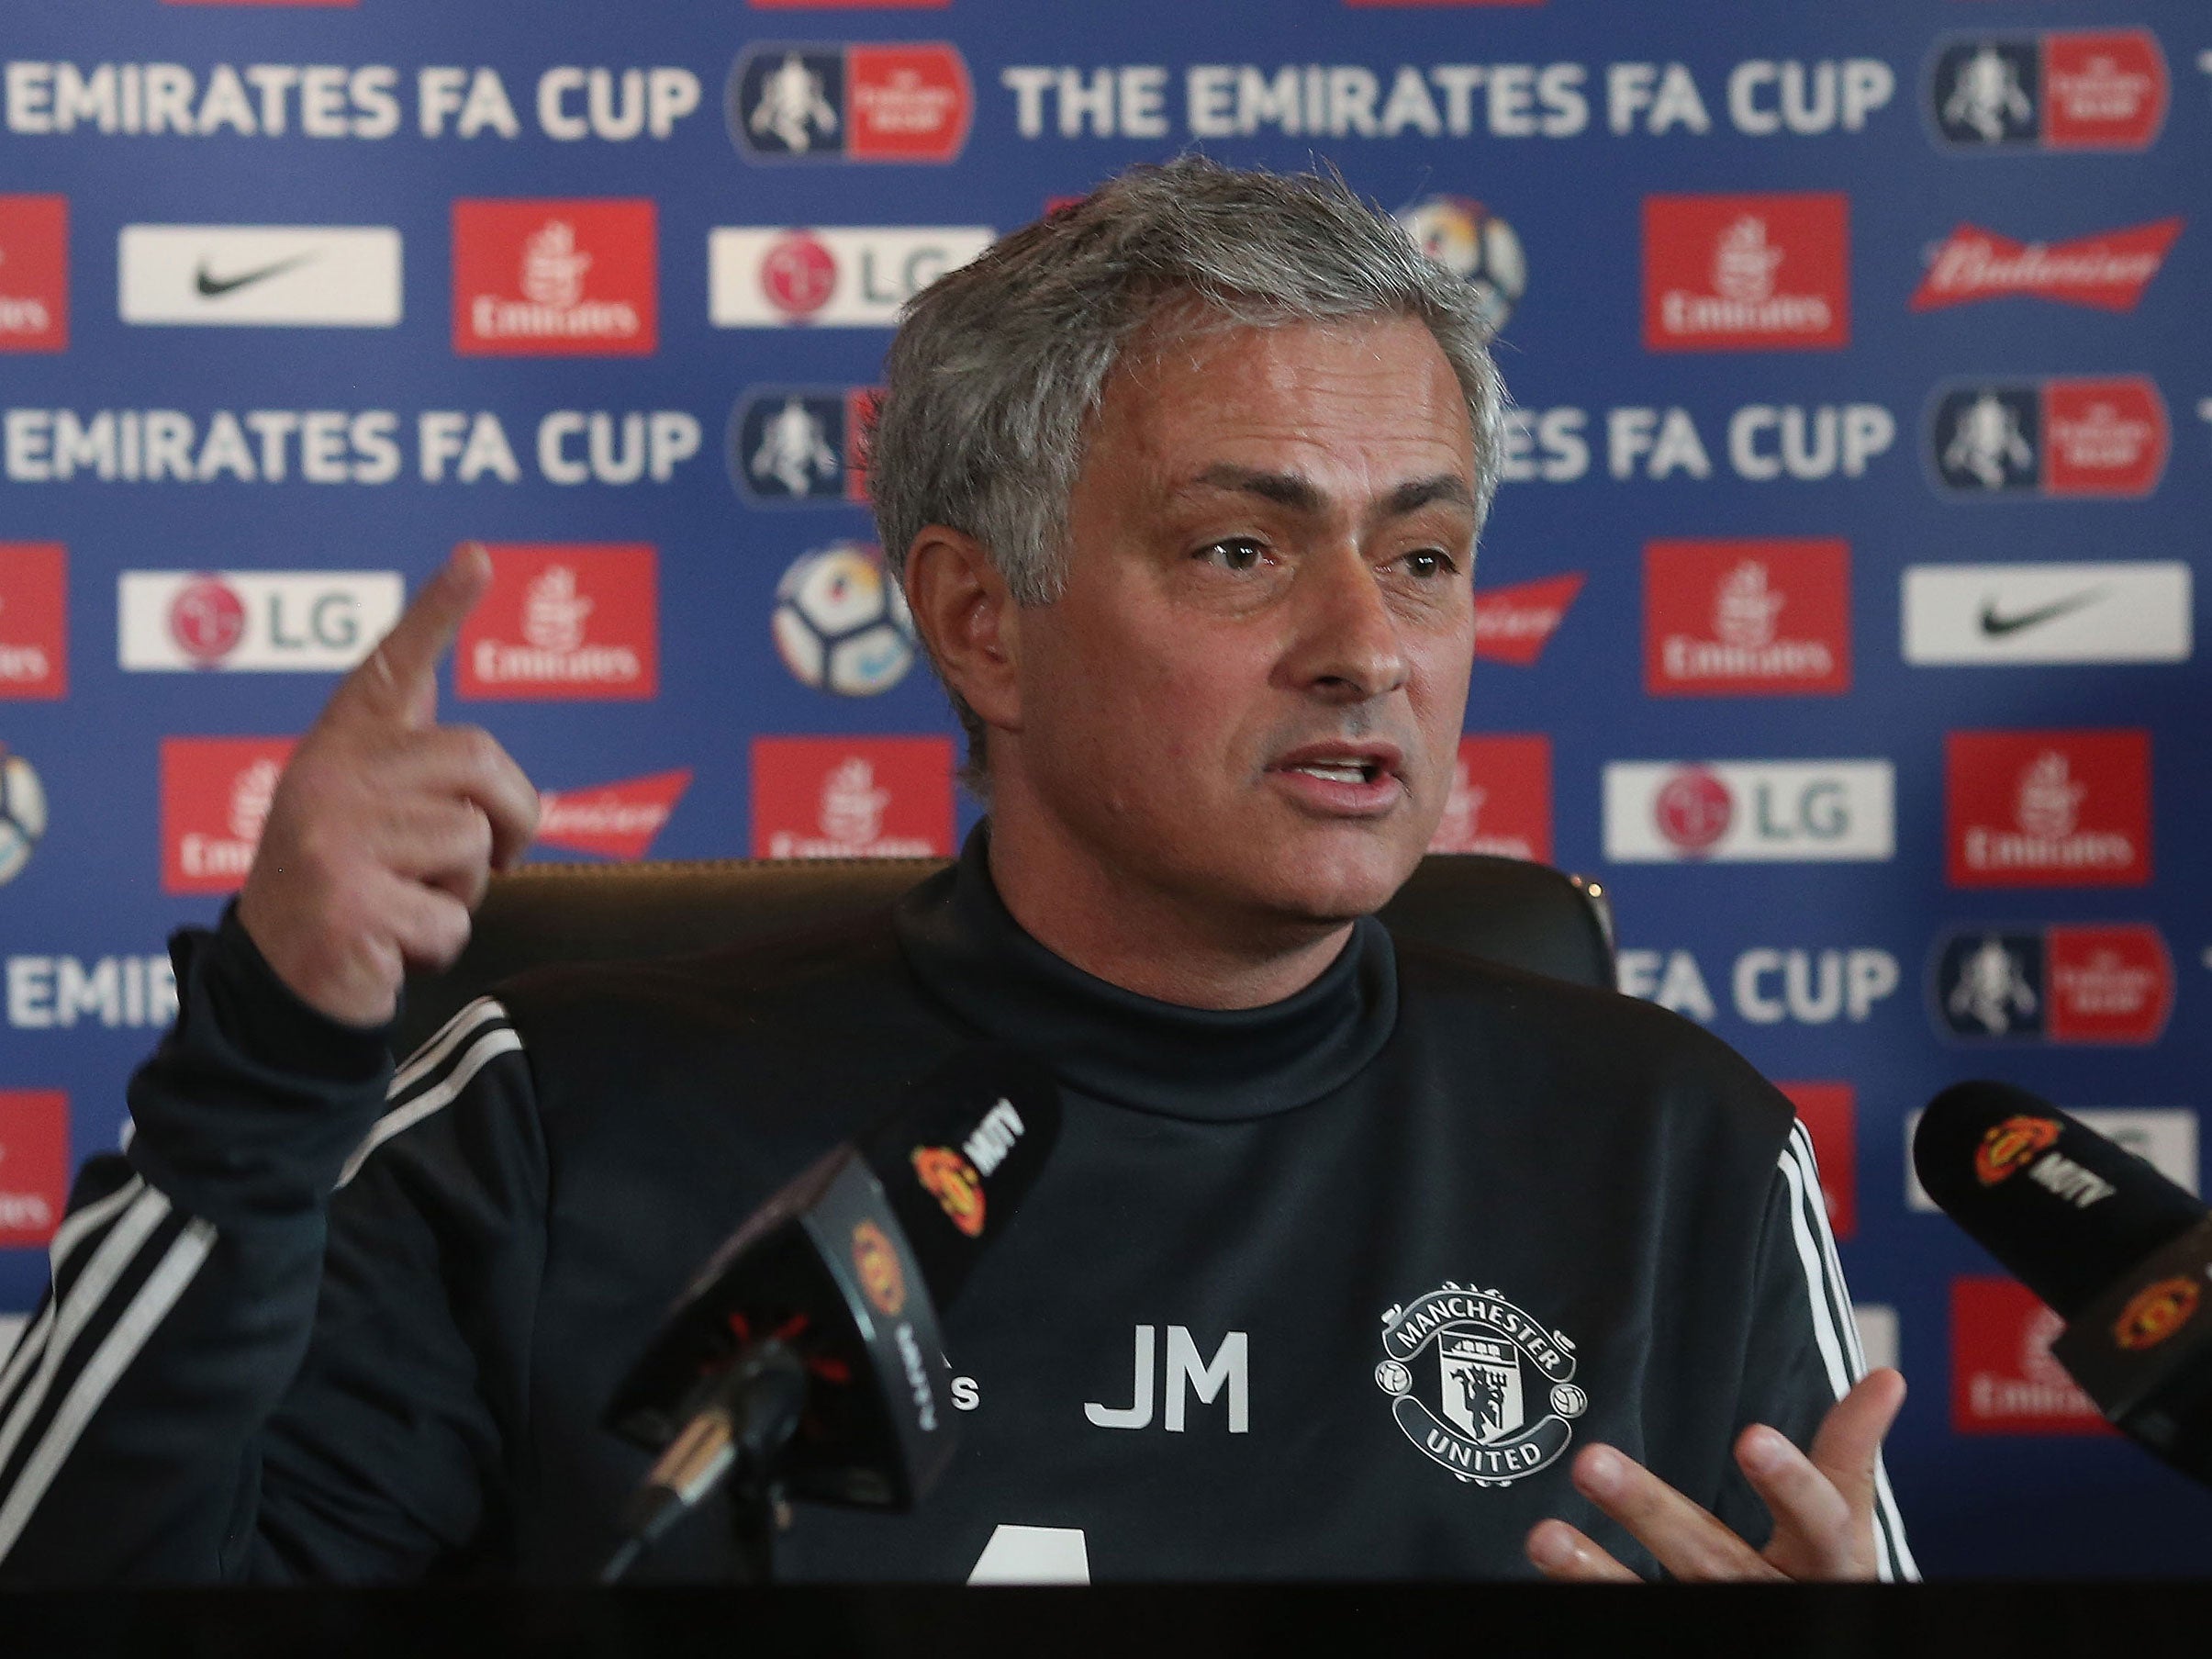 Jose Mourinho has once again defended his team